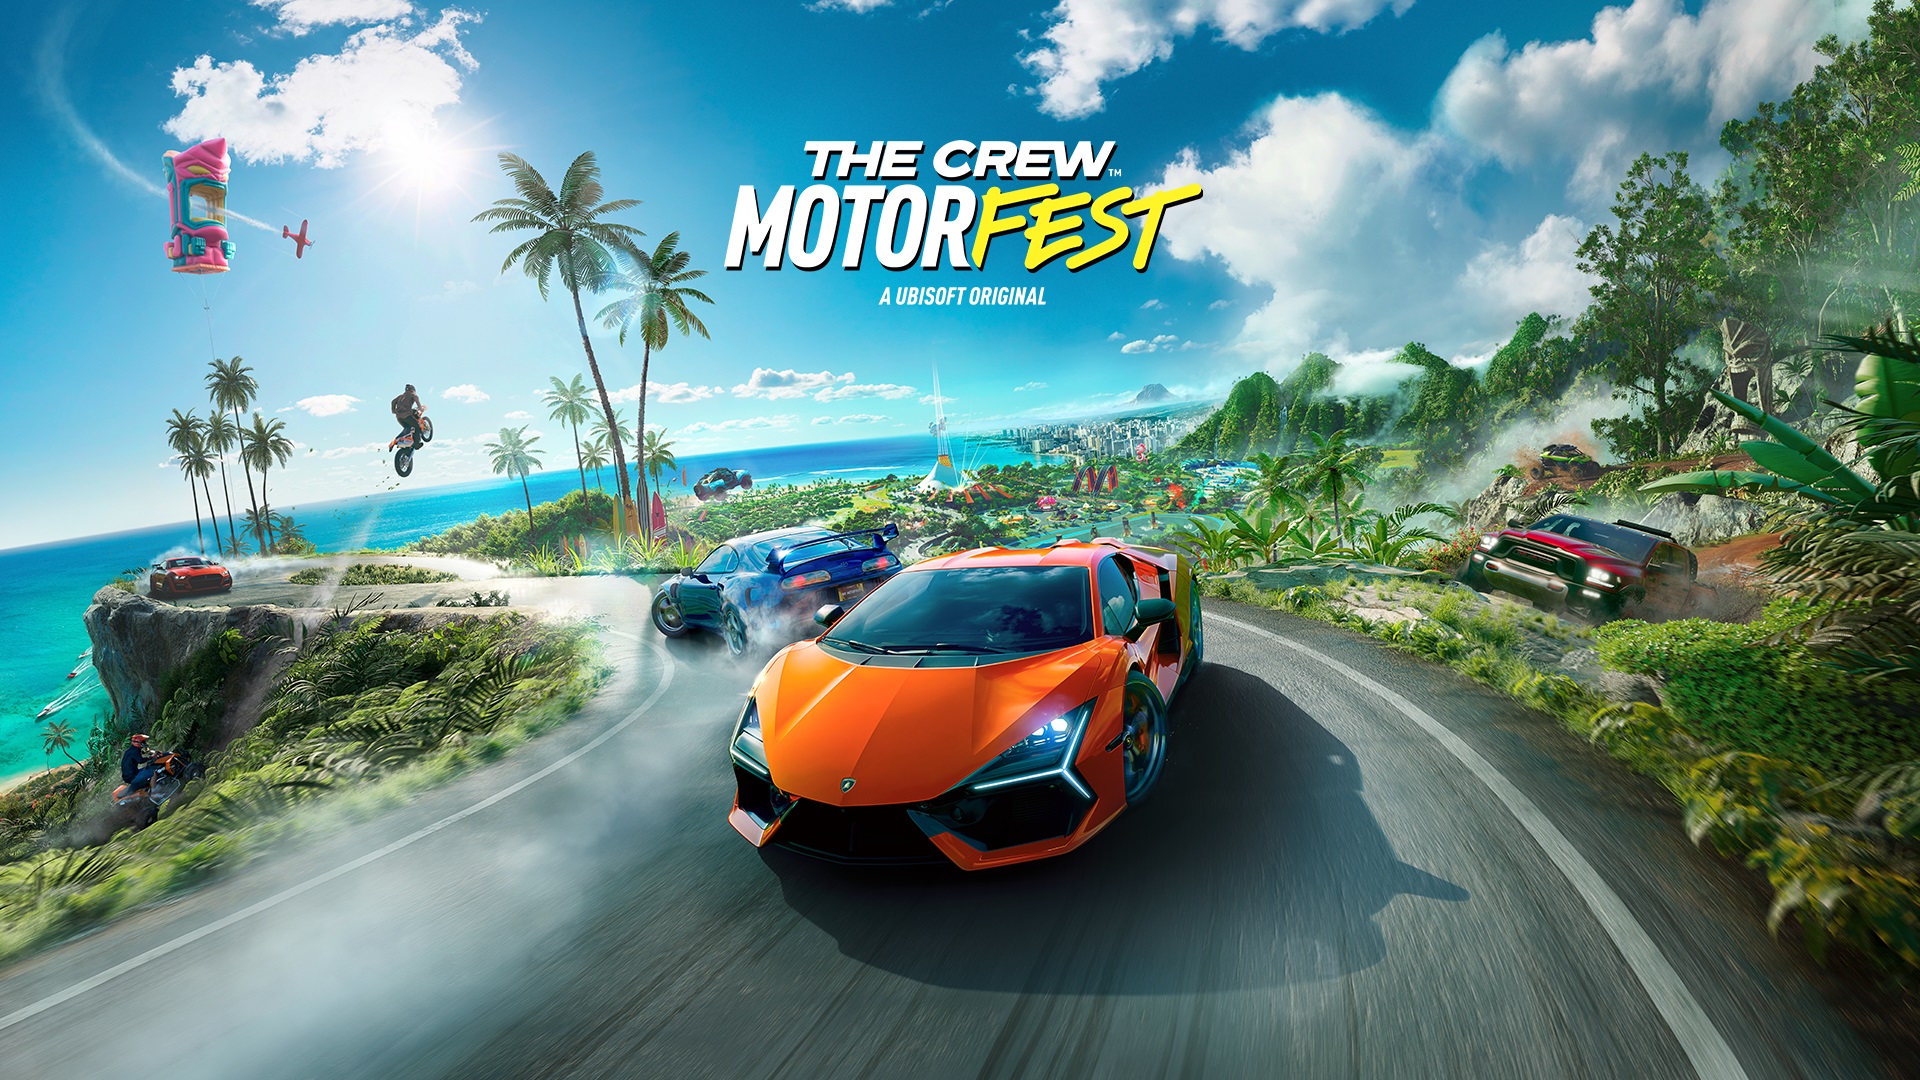 The Crew Motorfest launch guide: Release date, file size, preorder, and more